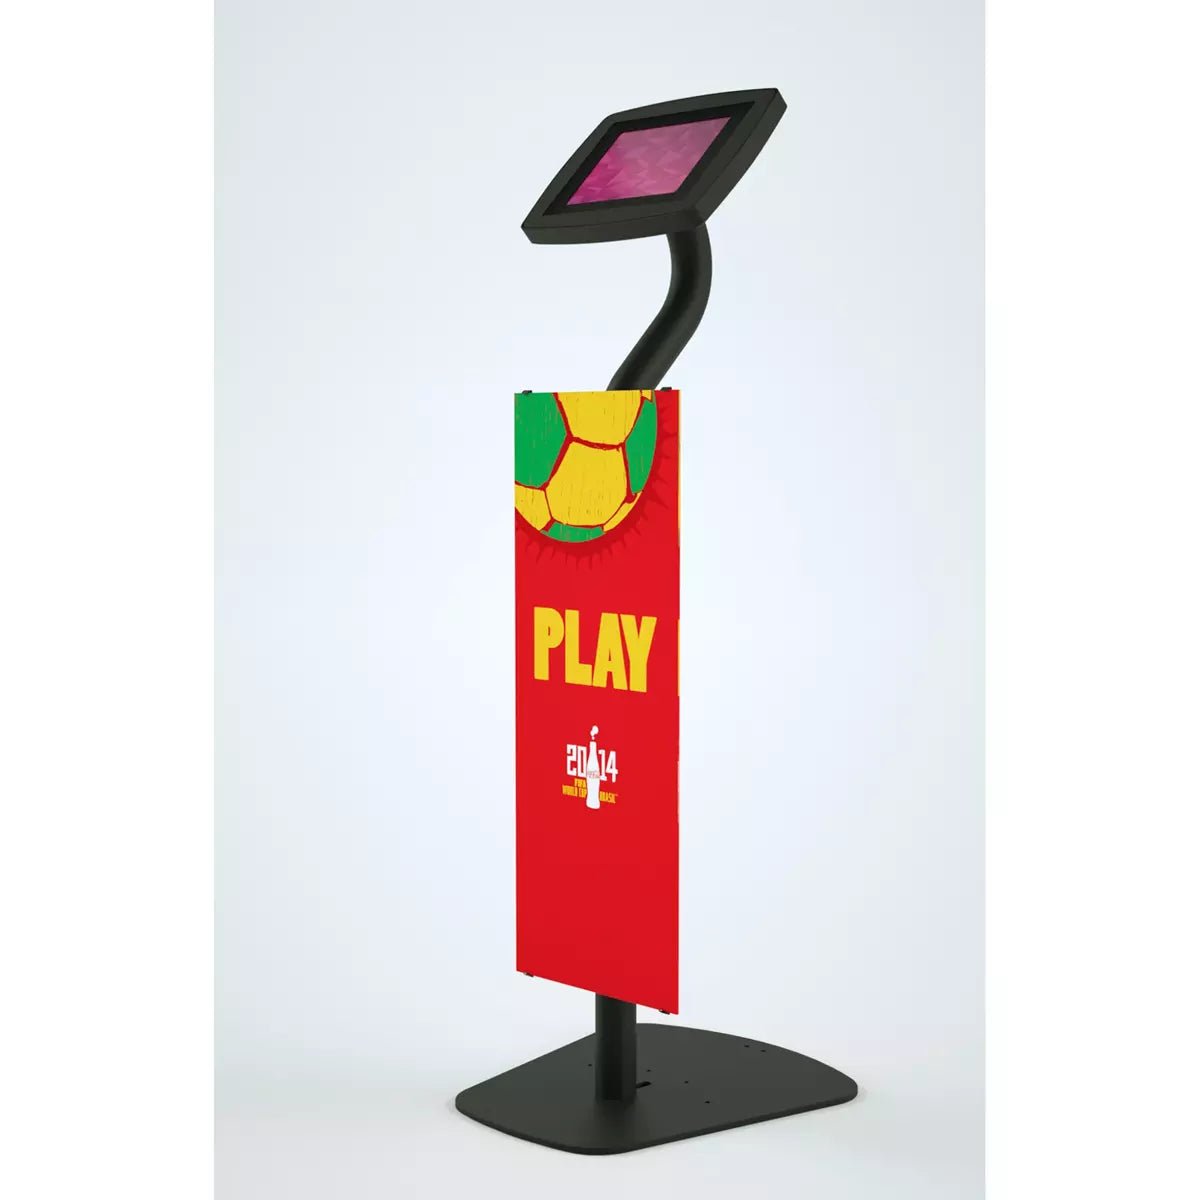 Floor freestanding Ipad and tablet kiosk with the graphic hardware holding up a soccer graphic.